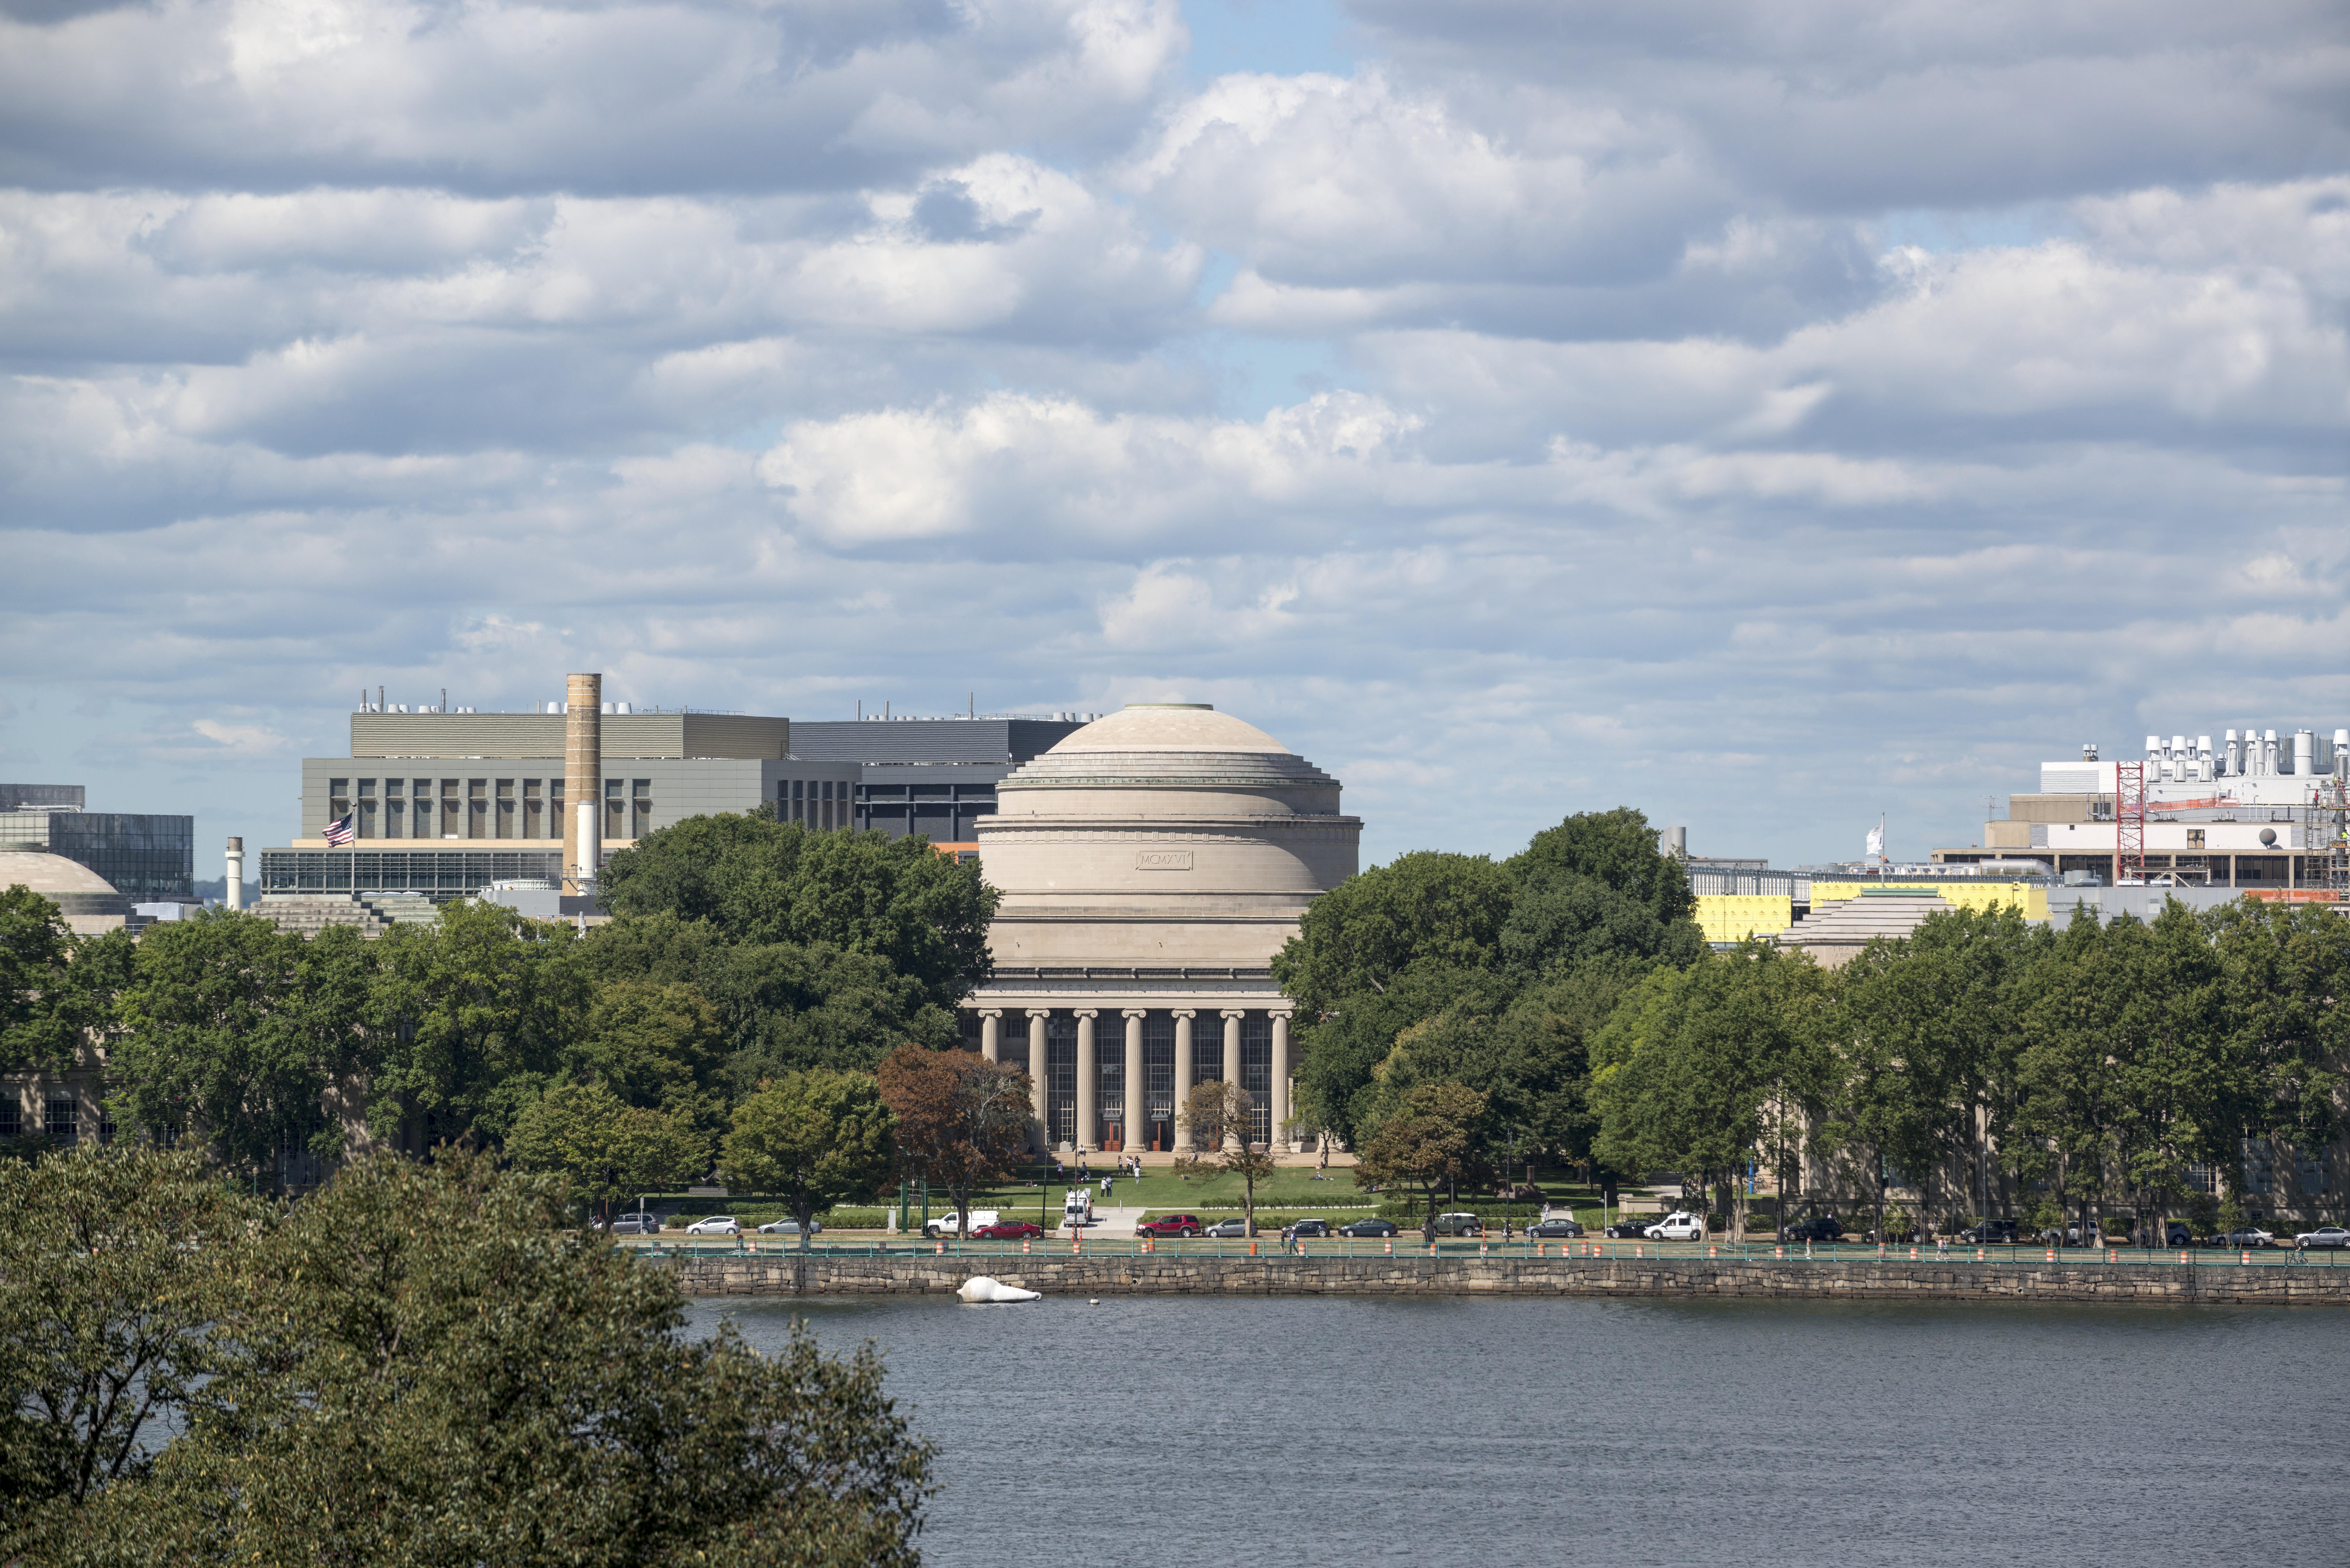 The MIT dome with the Charles River seen running in front of it.